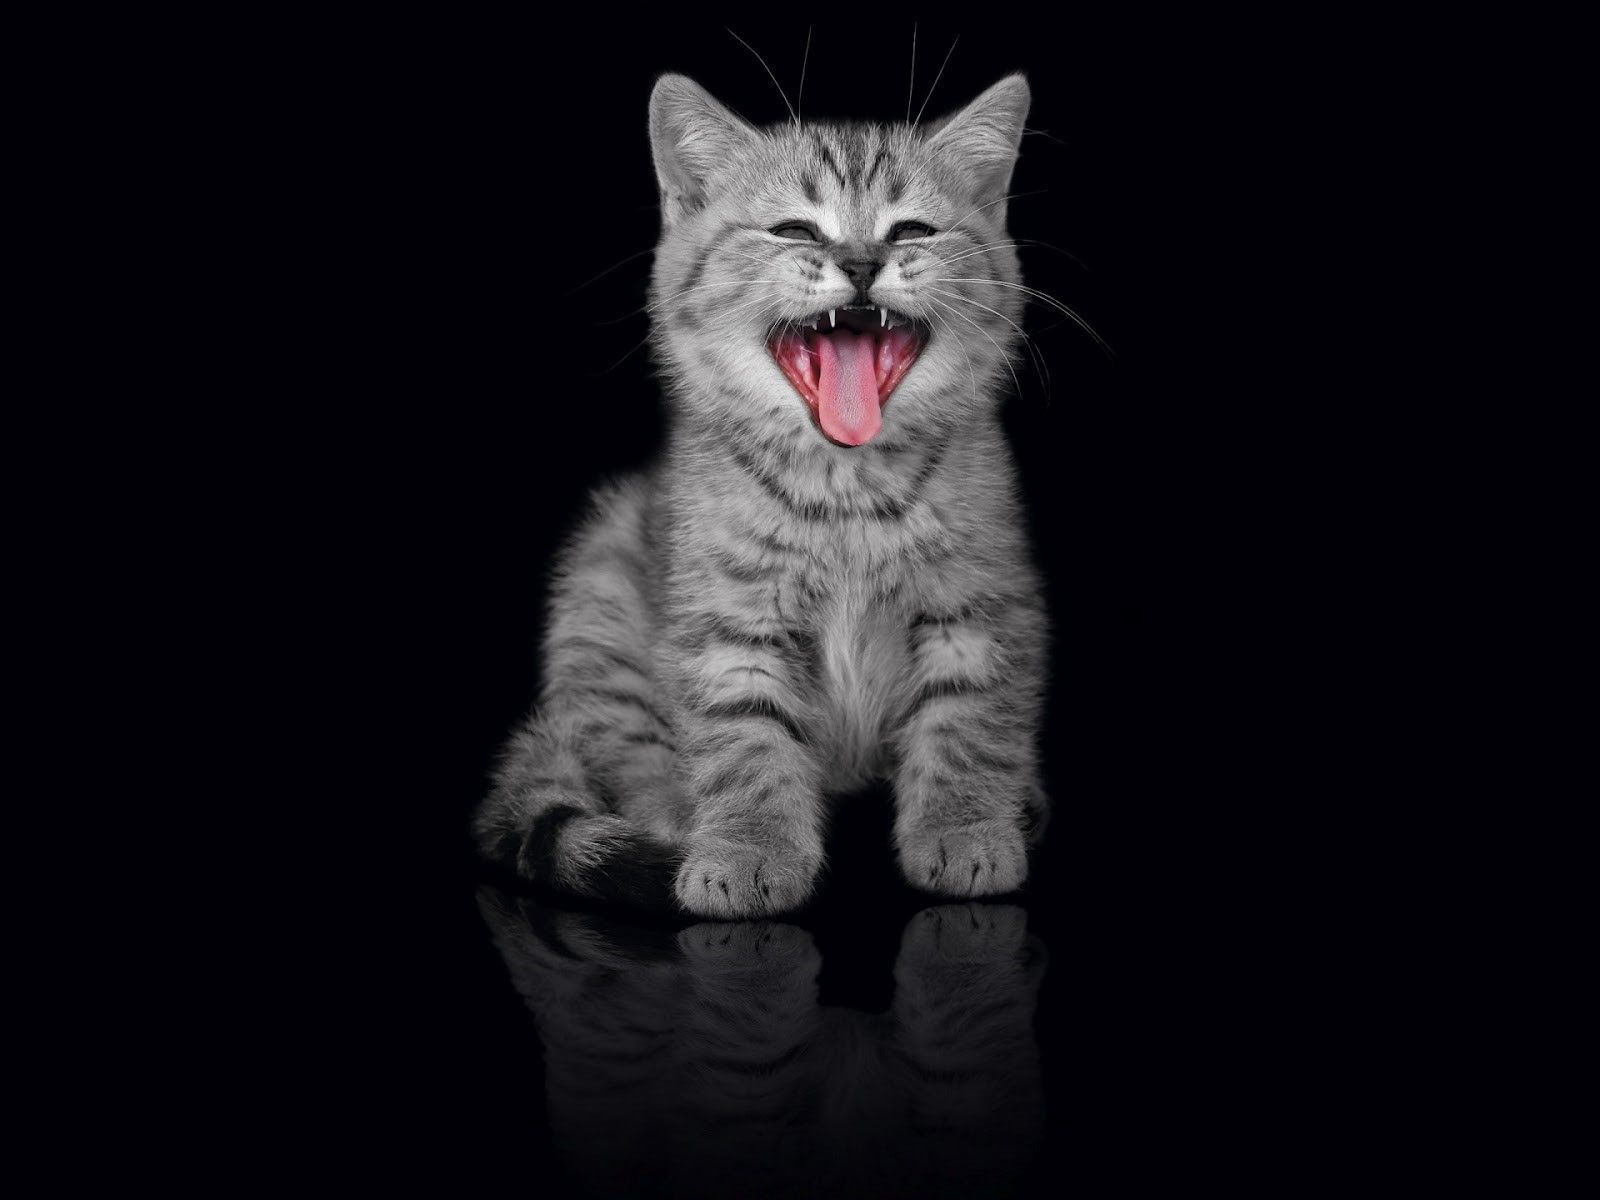 TGIF Cats out our blog network for more cute like this!. Cat wallpaper, Cats, Yawning animals